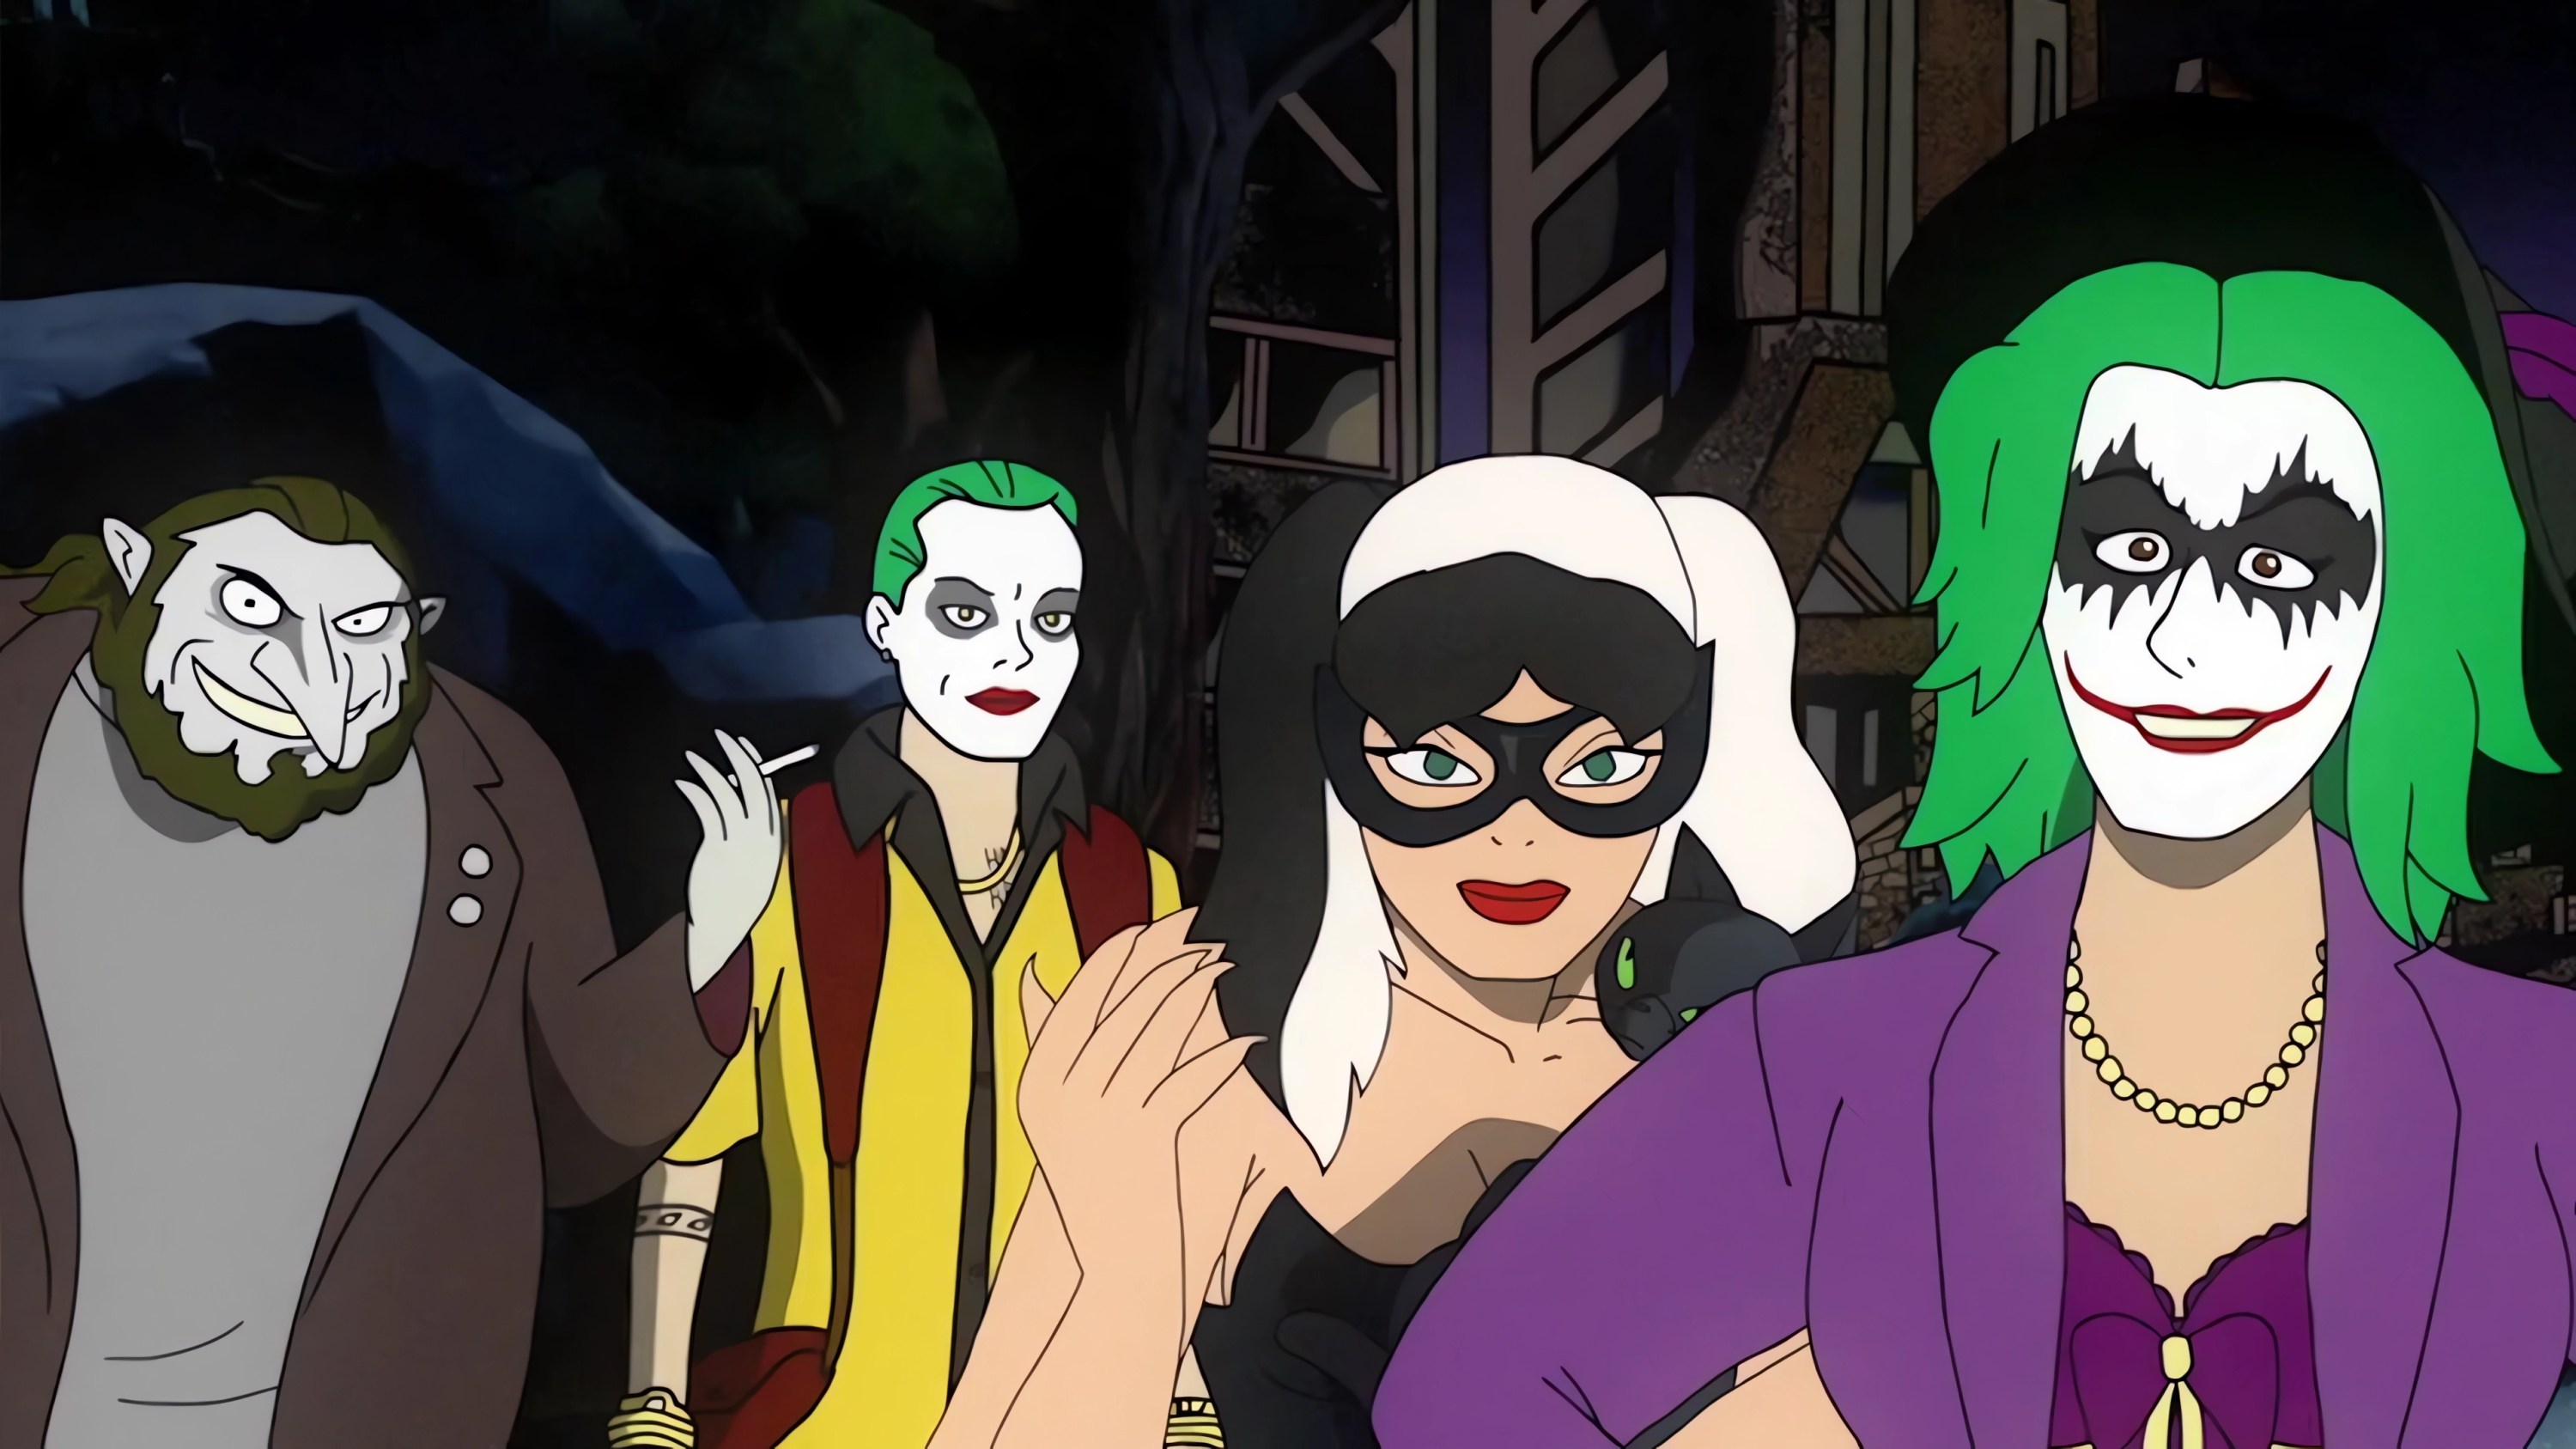 A still of Joker the Harlequin, Catwoman, Penguin, and Mr J. in the style of '90s Batman cartoons, all staring towards the camera The People's Joker